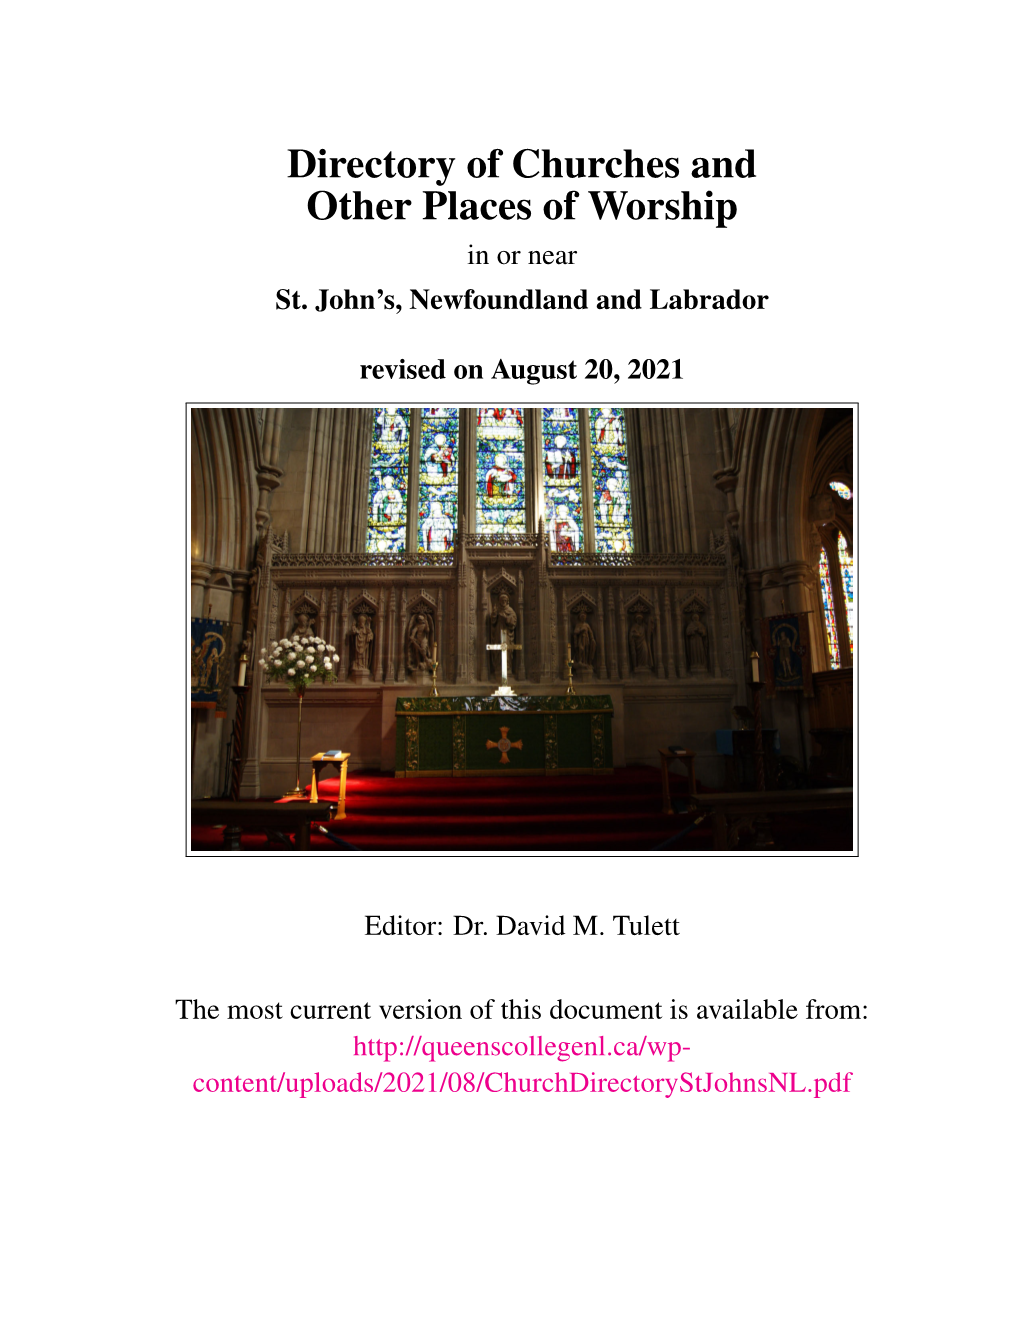 Directory of Churches and Other Places of Worship in Or Near St